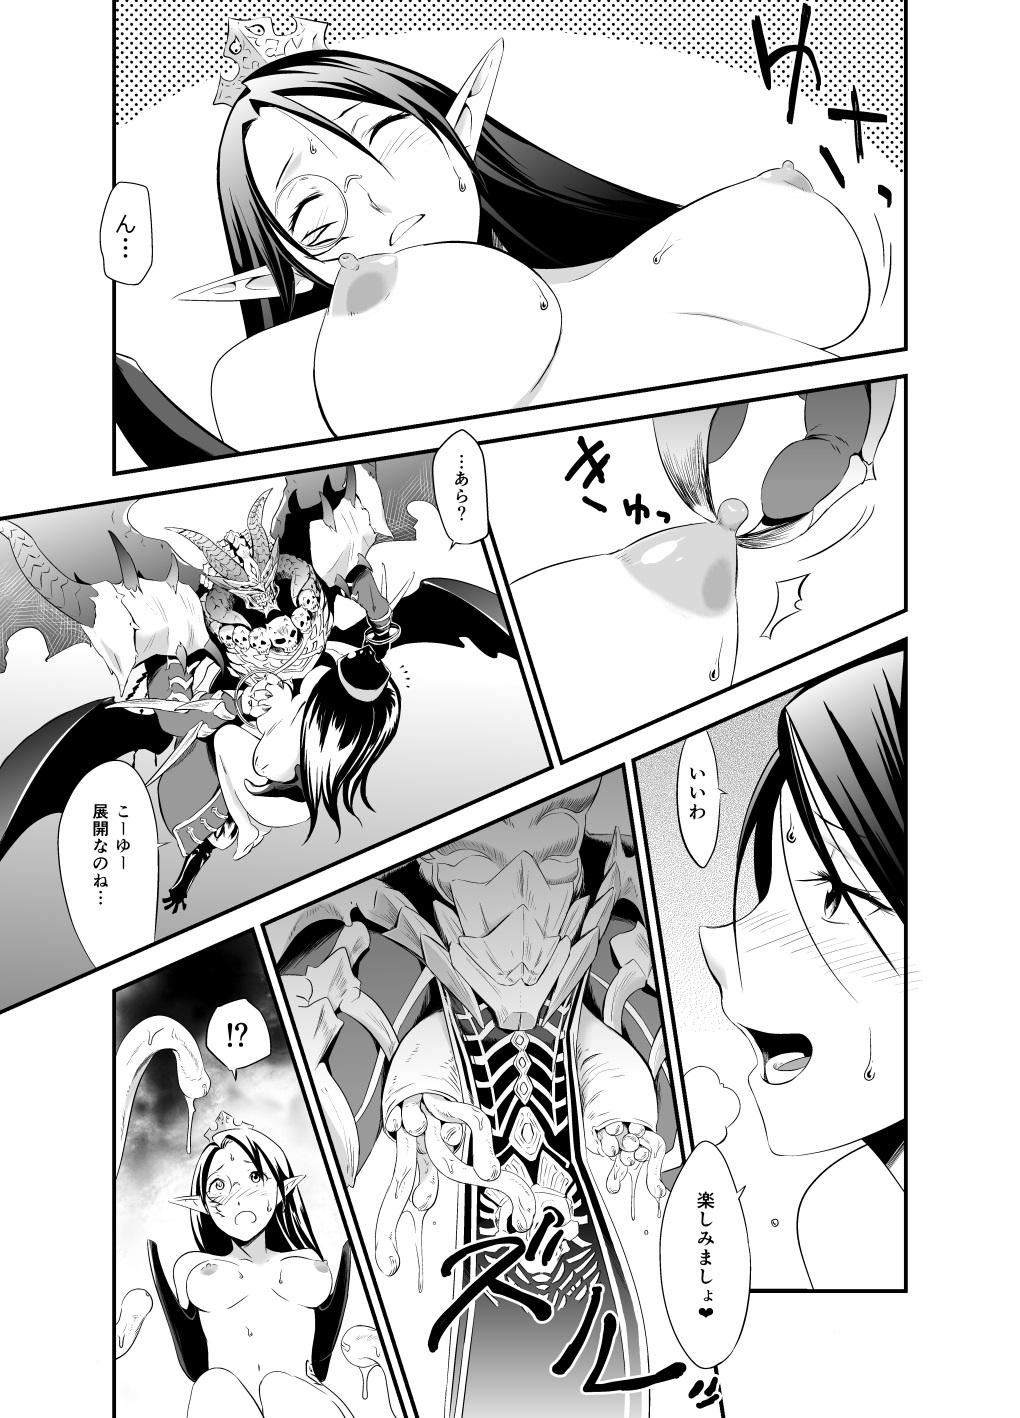 Audition 3rd Ride - Cardfight vanguard Tan - Page 9